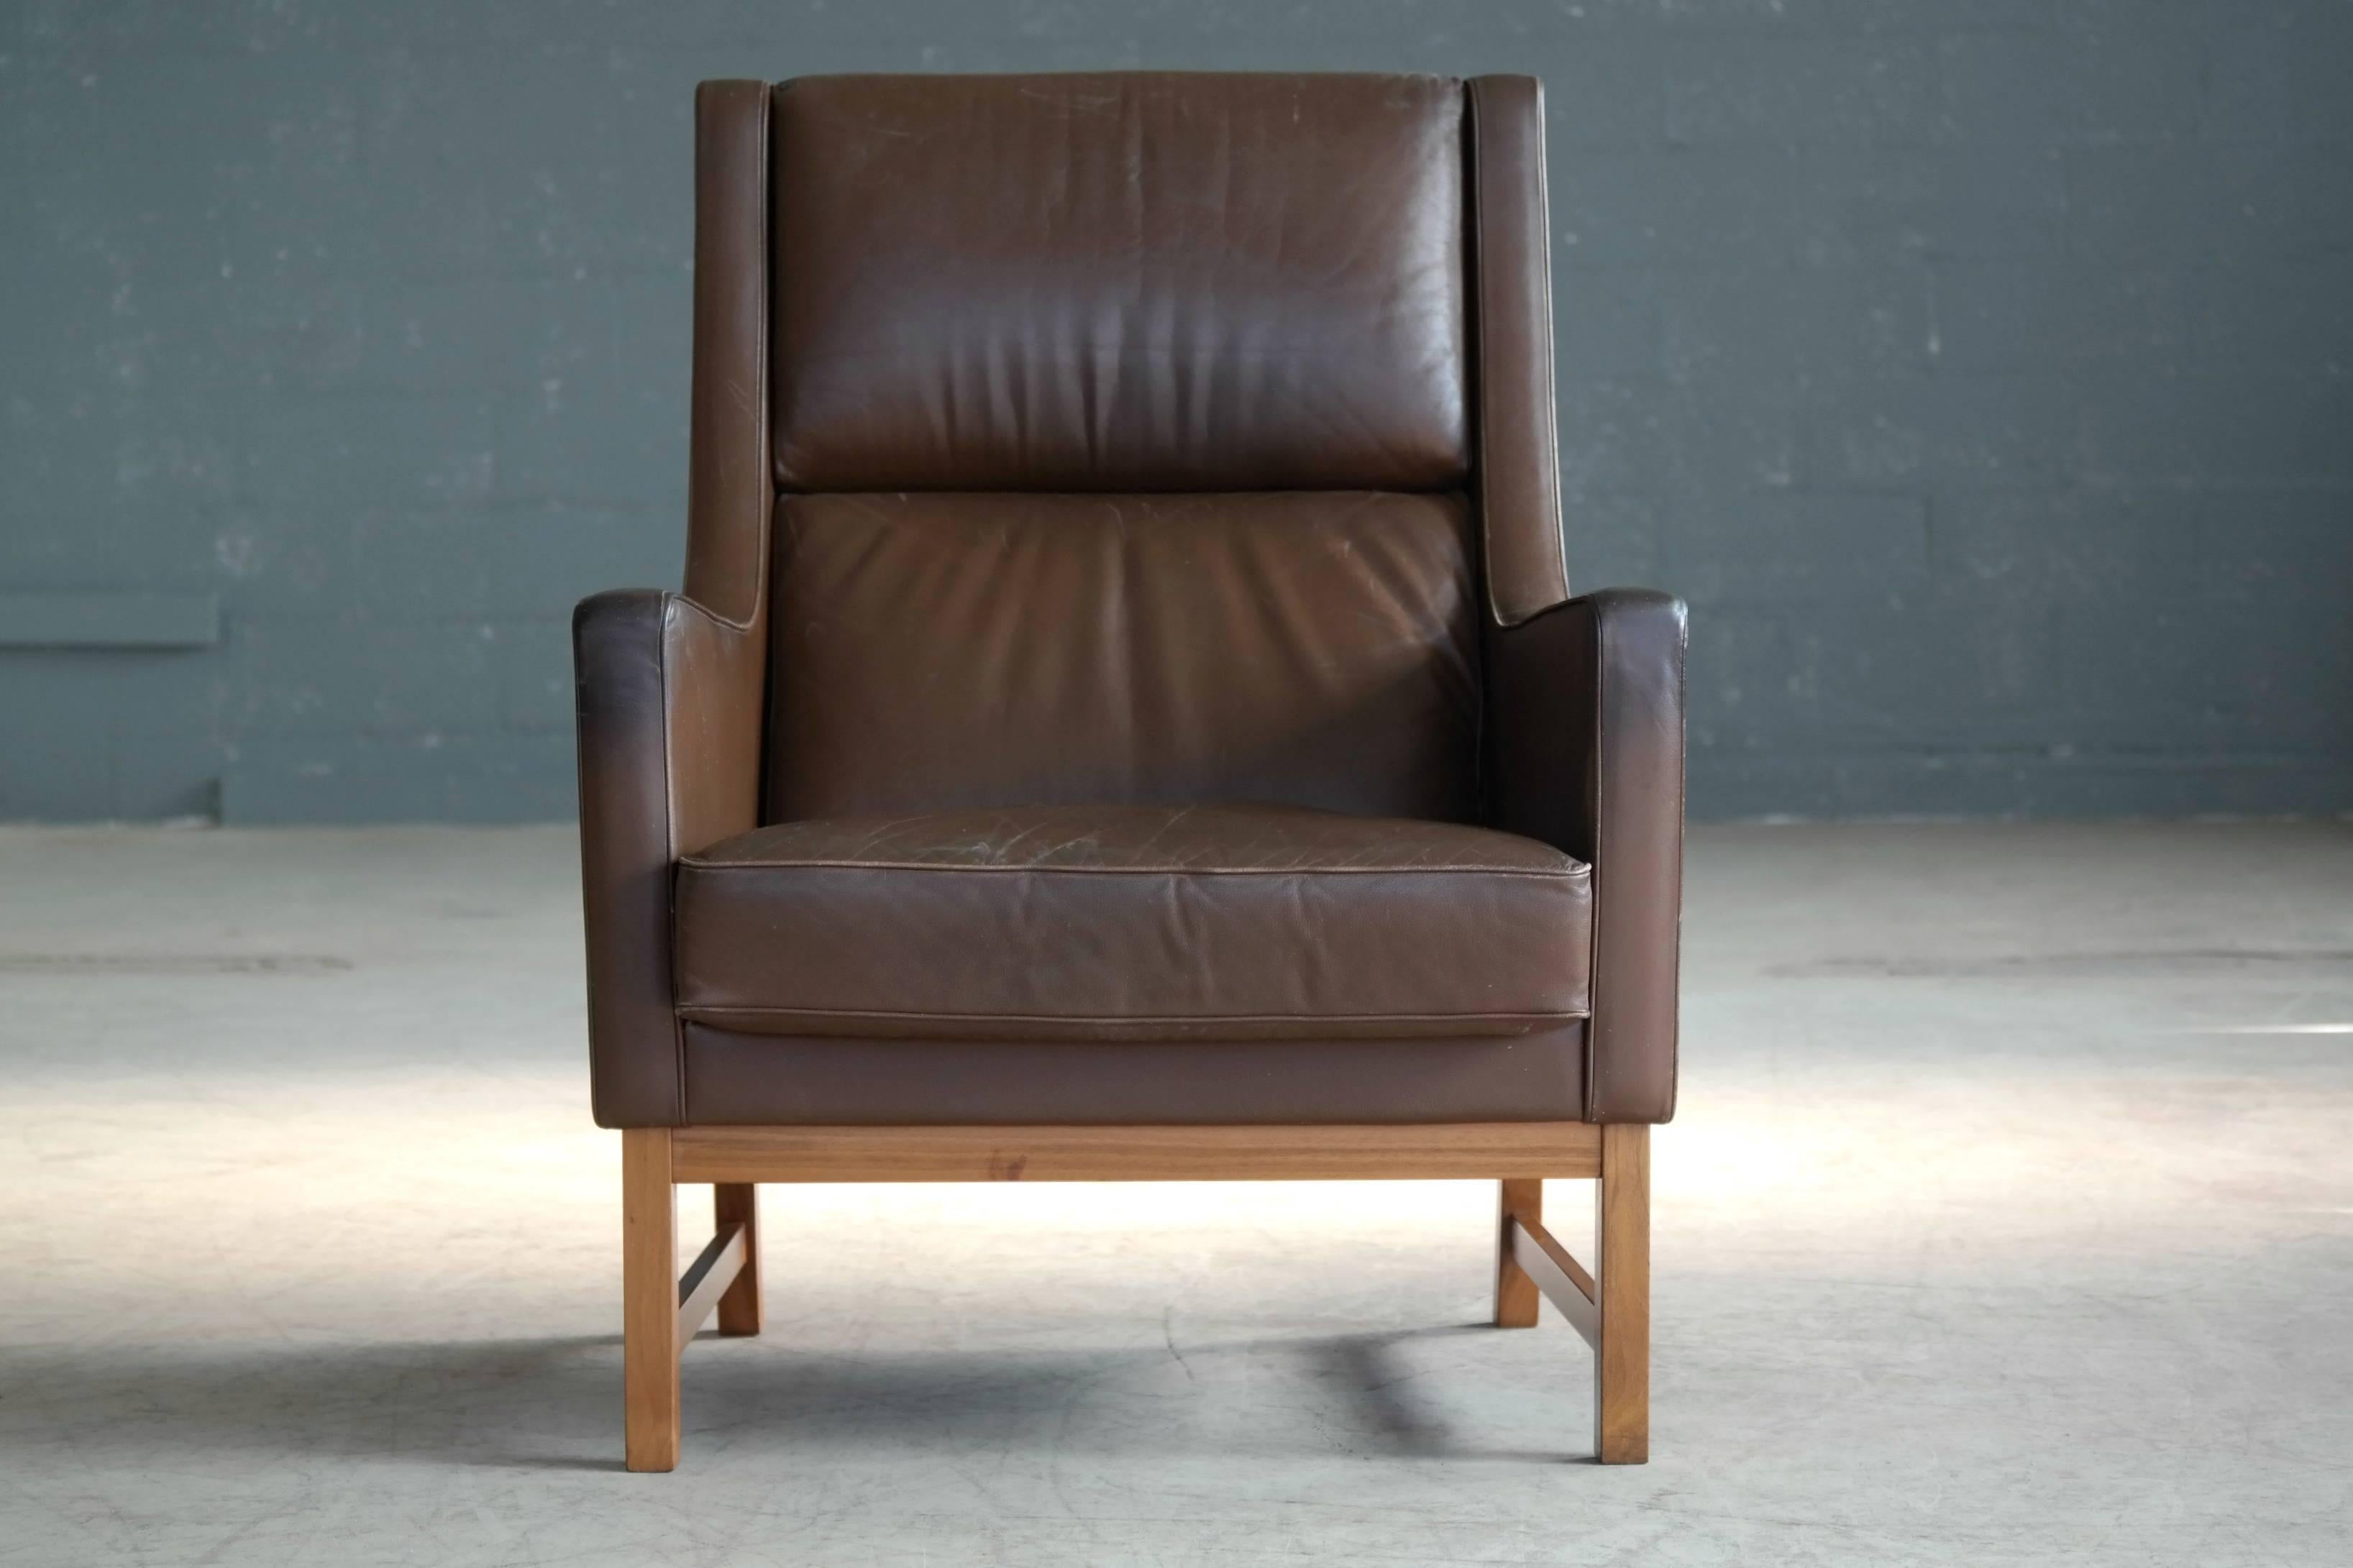 Very elegant Kai Lyngfeldt Larsen style 1960s high back lounge or armchair made in Denmark. Very similar to Larsen's well known but rare designs carried out by Soren WIlladsen. Supple chocolate brown leather raised on a bases of stained beechwood.